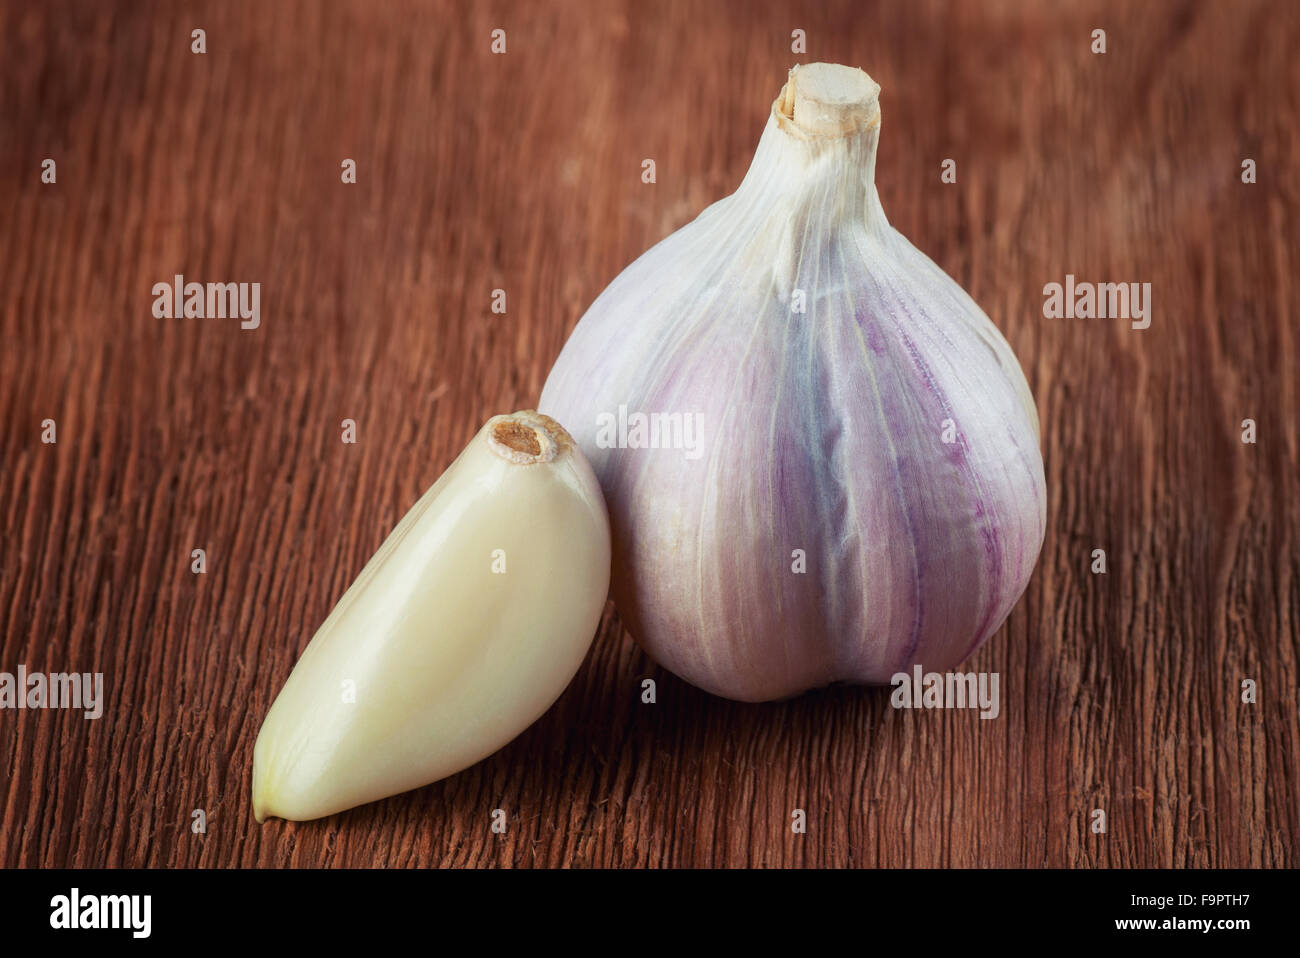 Fresh head of garlic and clove on brown wooden table Stock Photo